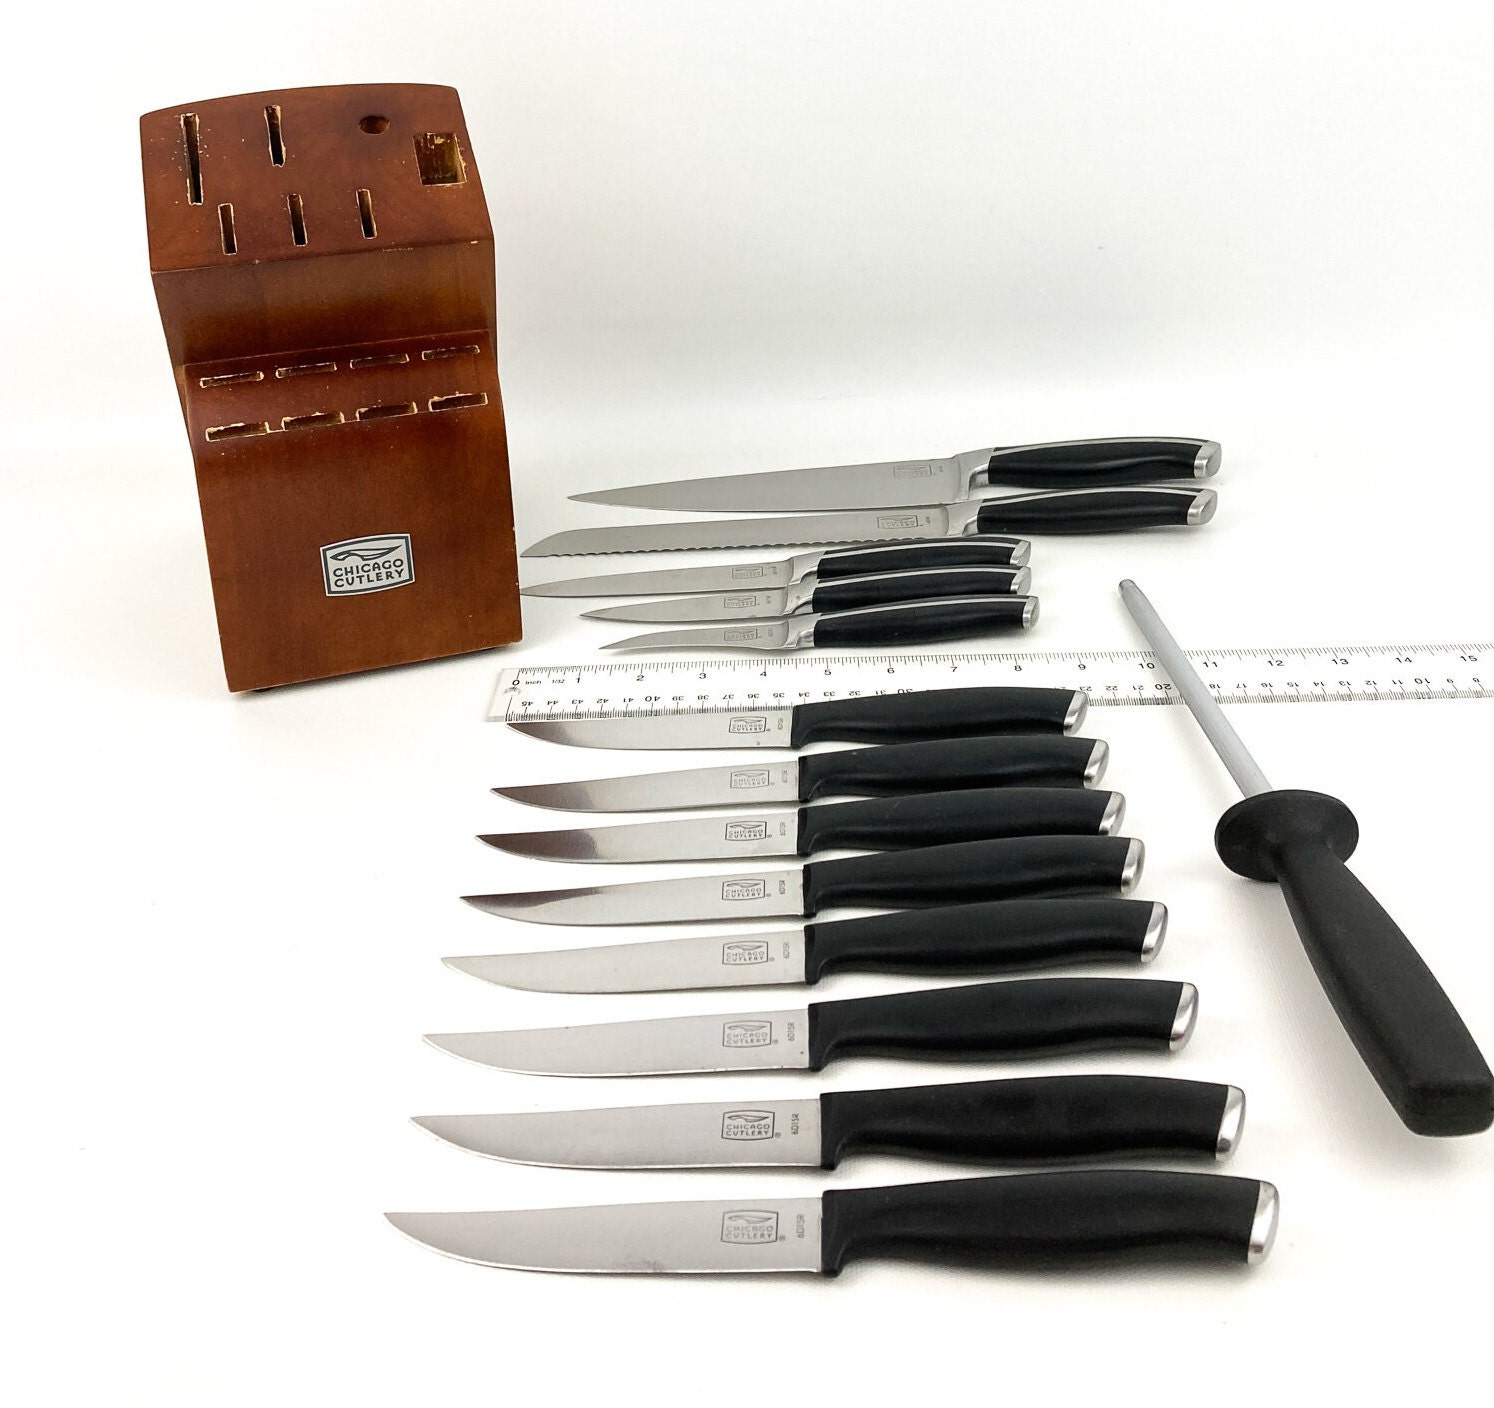  Chicago Cutlery Fusion 6 Piece Forged Premium Steak Knife Set,  Cushion-Grip Handles with Stainless Steel Blades, Resists Stains, Rust, &  Pitting, Kitchen Knives: Home & Kitchen